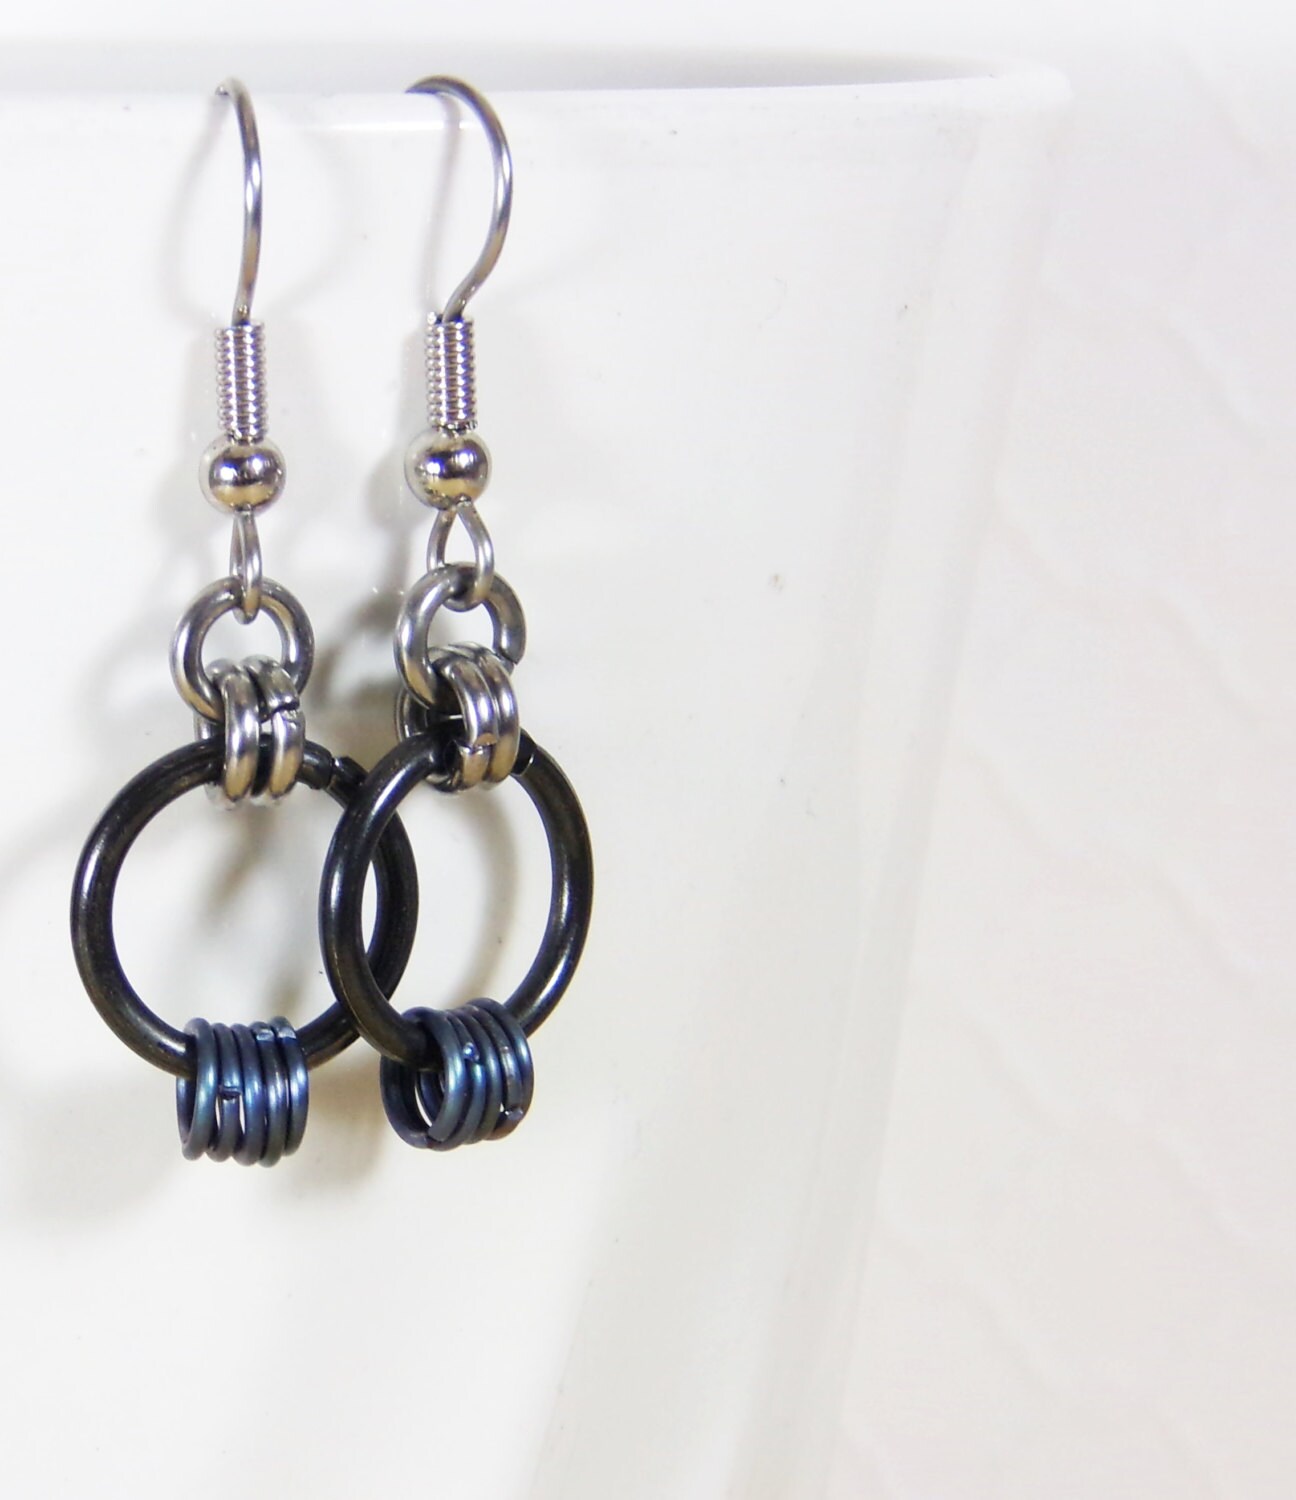 Stainless Steel Chainmaille Earrings- Rocker Earrings - Simple Chainmaille earrings - Go to Earrings - Chainmaille Jewelry